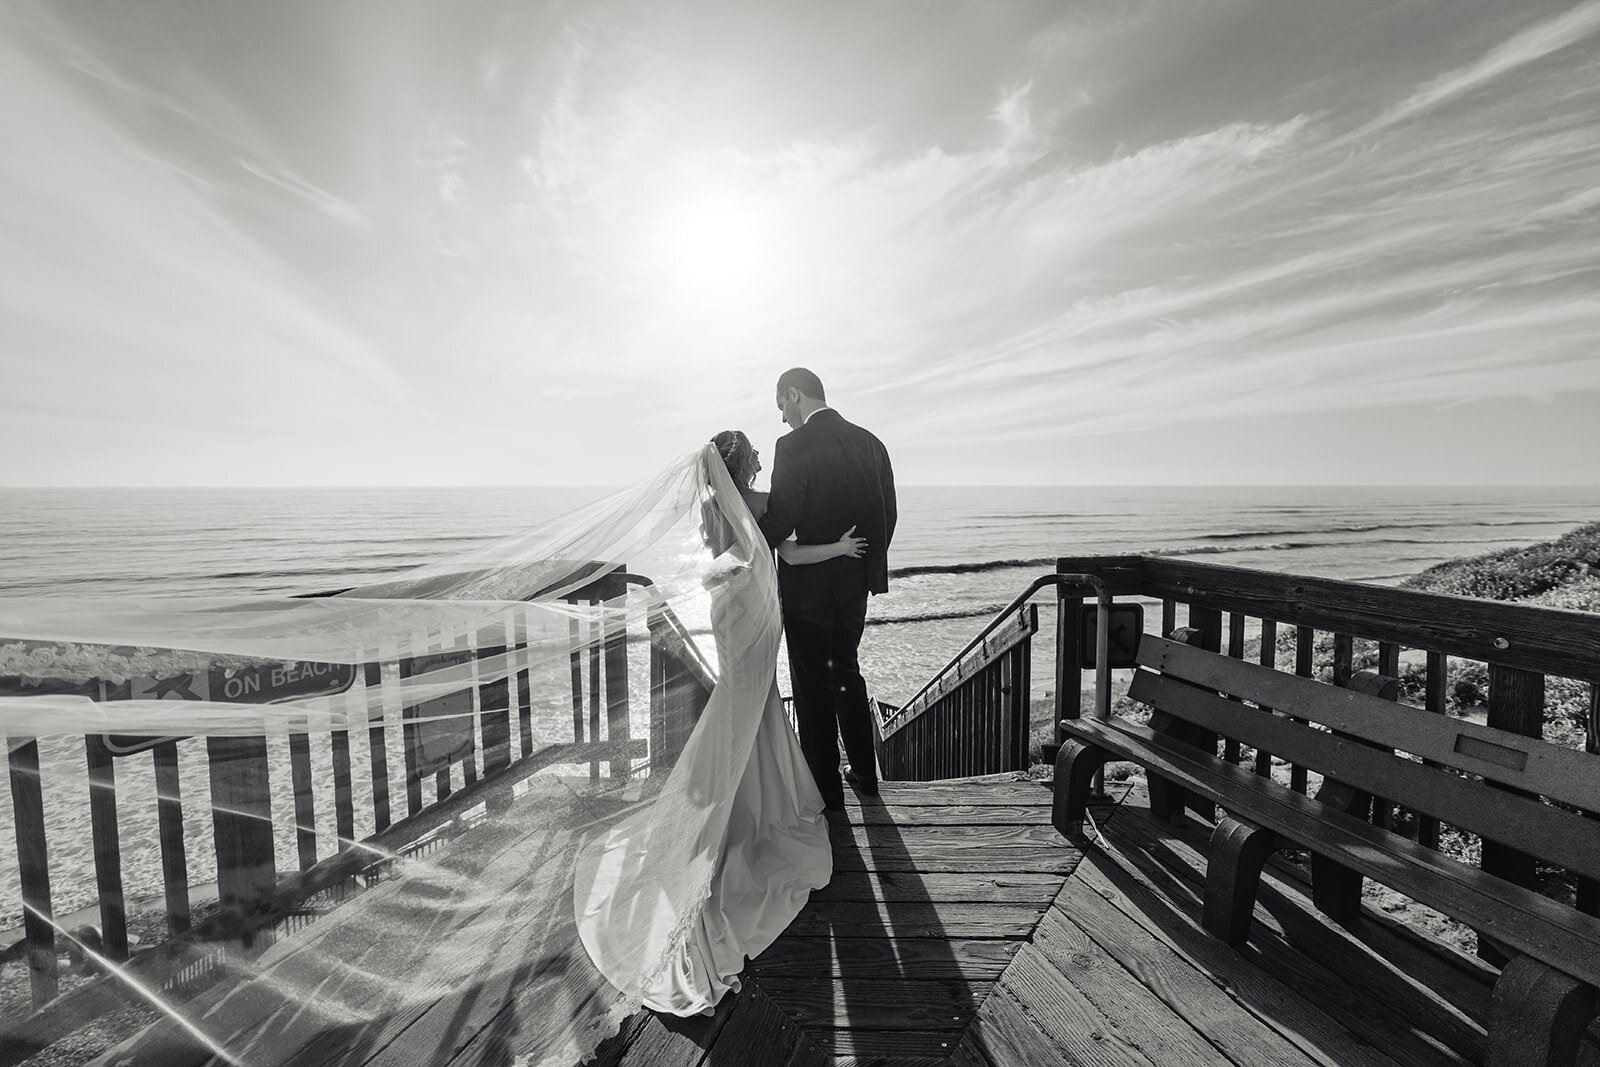 black and white photo of bride and groom on a deck facing the ocean with the bride's veil blowing in the wind